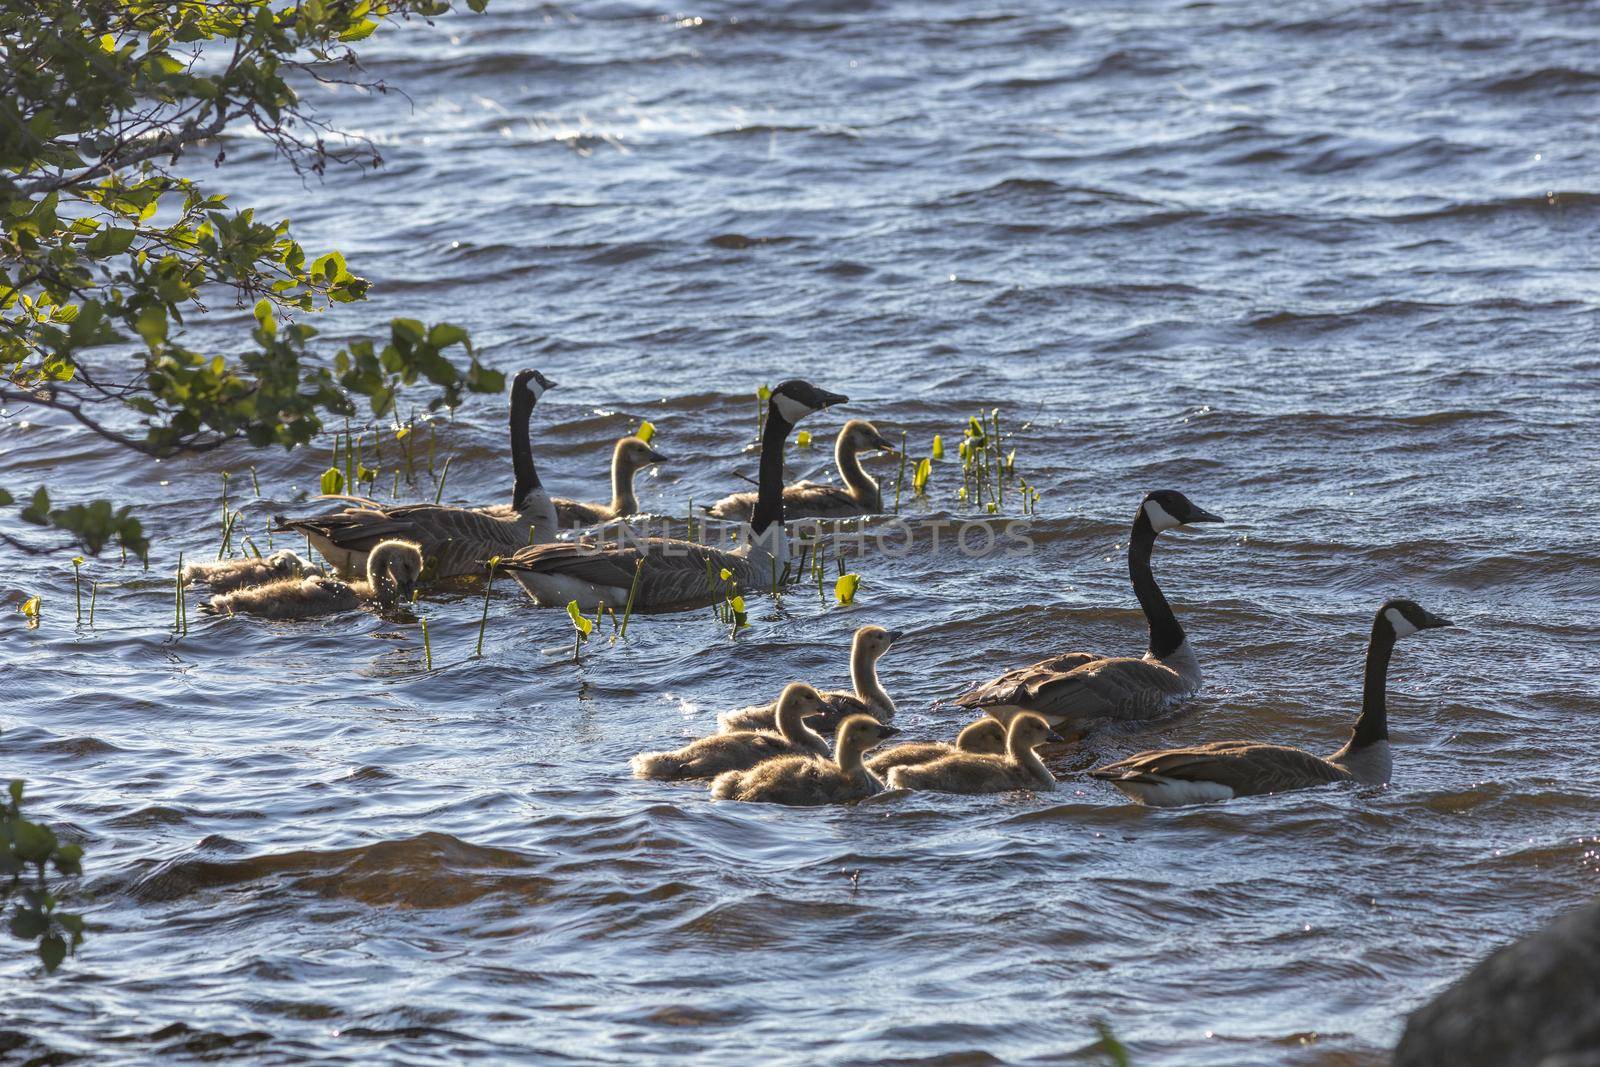 Two pairs of Canada geese (Branta canadensis) accompany their young goslings in the water at the edge of a lake. Evening sun illuminates their feathers as they swim in Algonquin Park, Ontario, Canada.